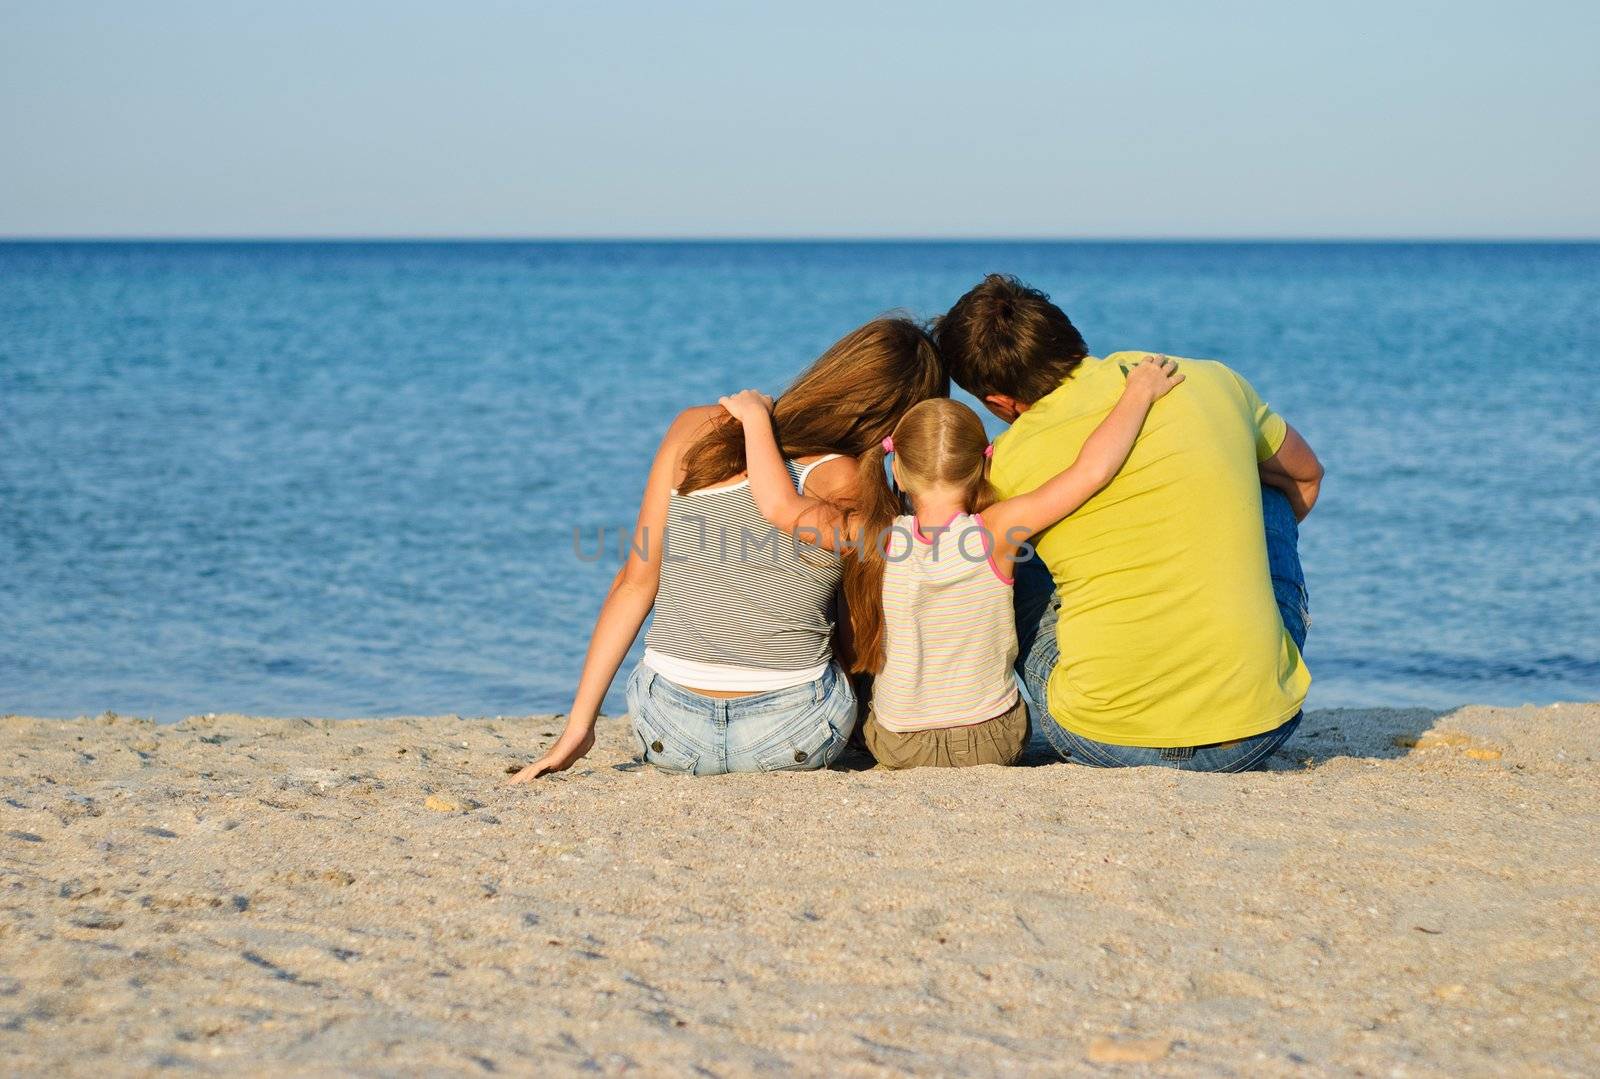 Family on the beach by olegator1977